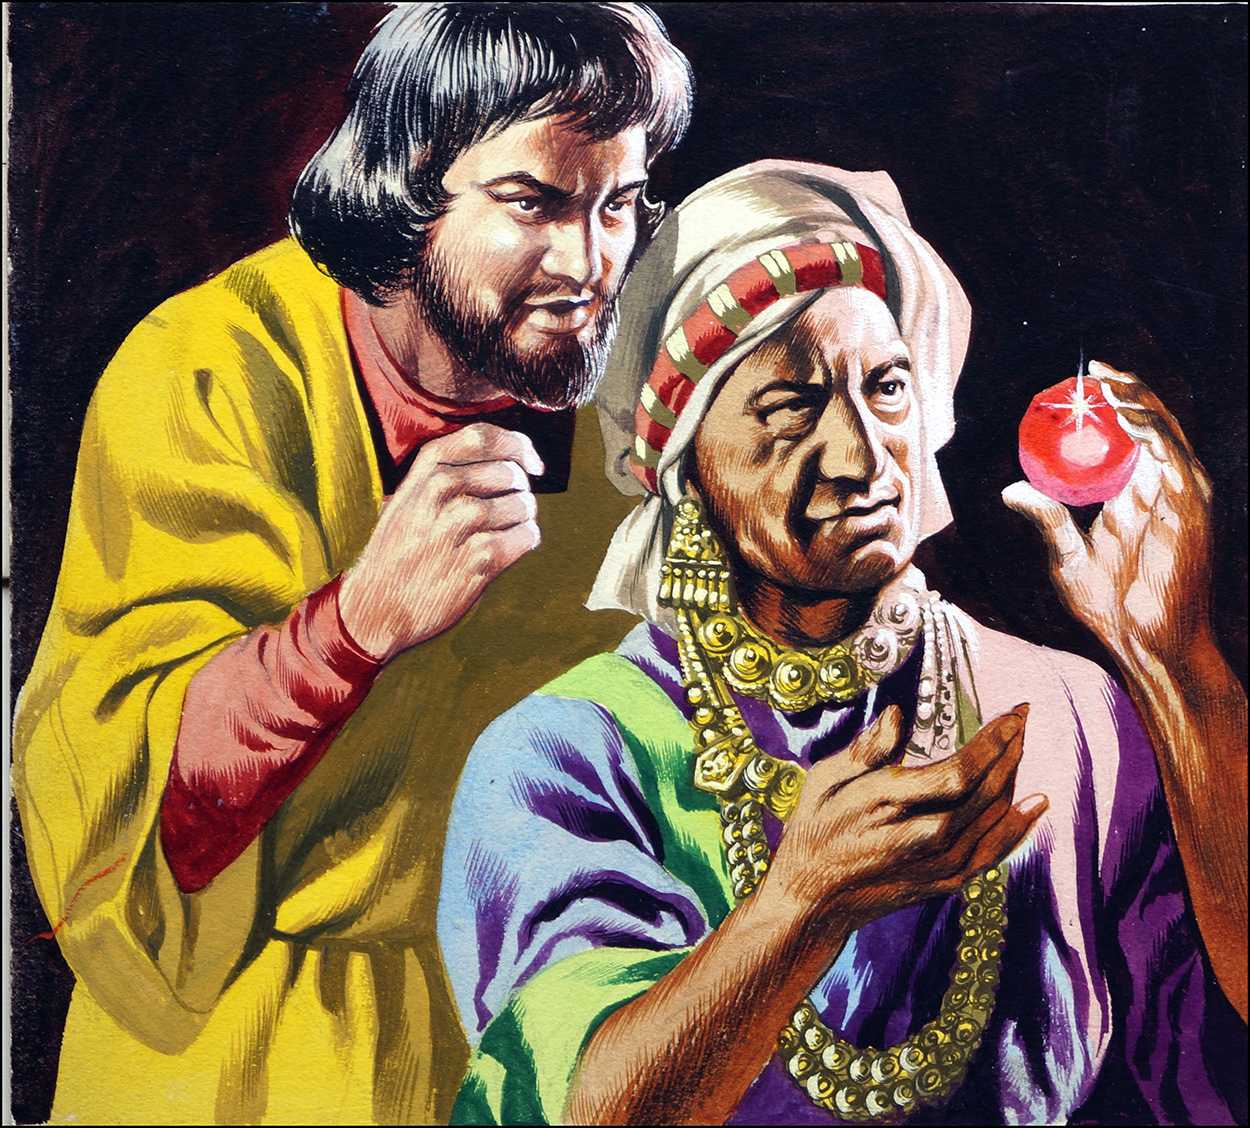 Marco Polo - The Ruby (Original) art by Ron Embleton Art at The Illustration Art Gallery